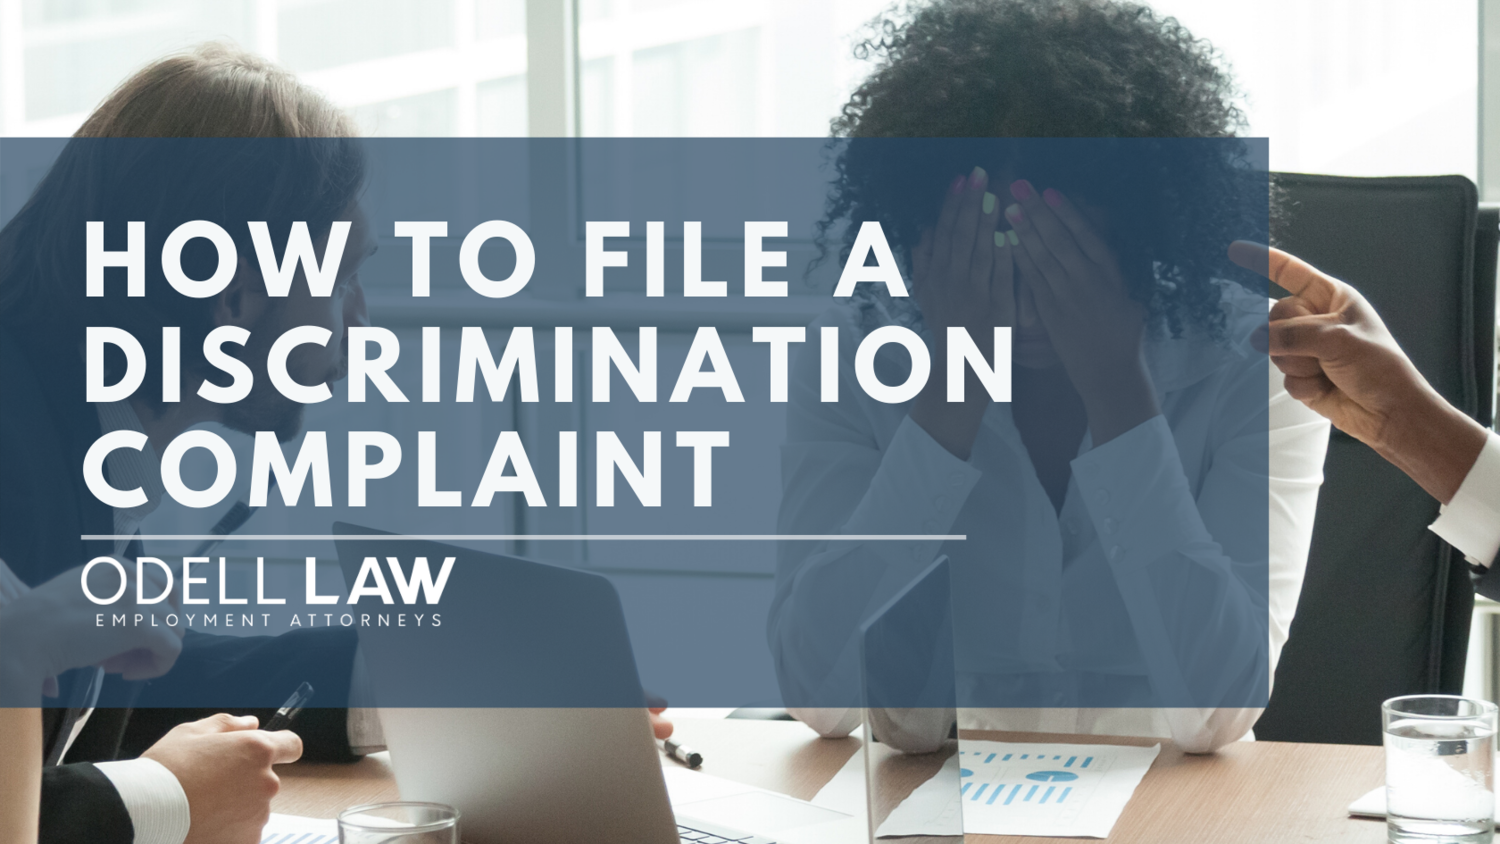 Is Workplace Discrimination Illegal? Yes